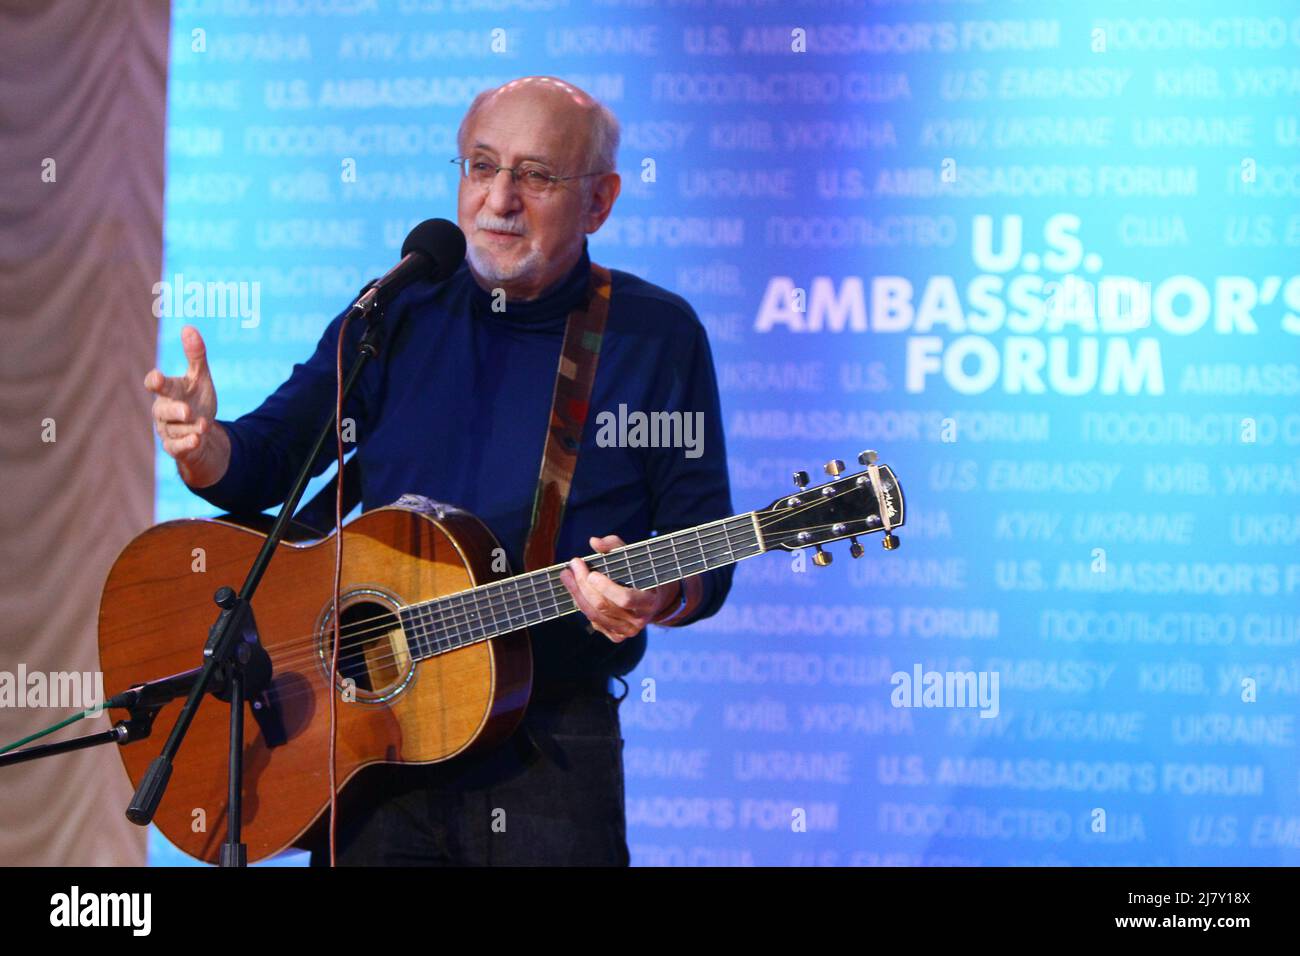 Musician Peter Yarrow of the legendary folk group Peter, Paul and Mary performs at the U.S. Ambassador's Forum, December 13, 2012 in Kyiv, Ukraine. Stock Photo